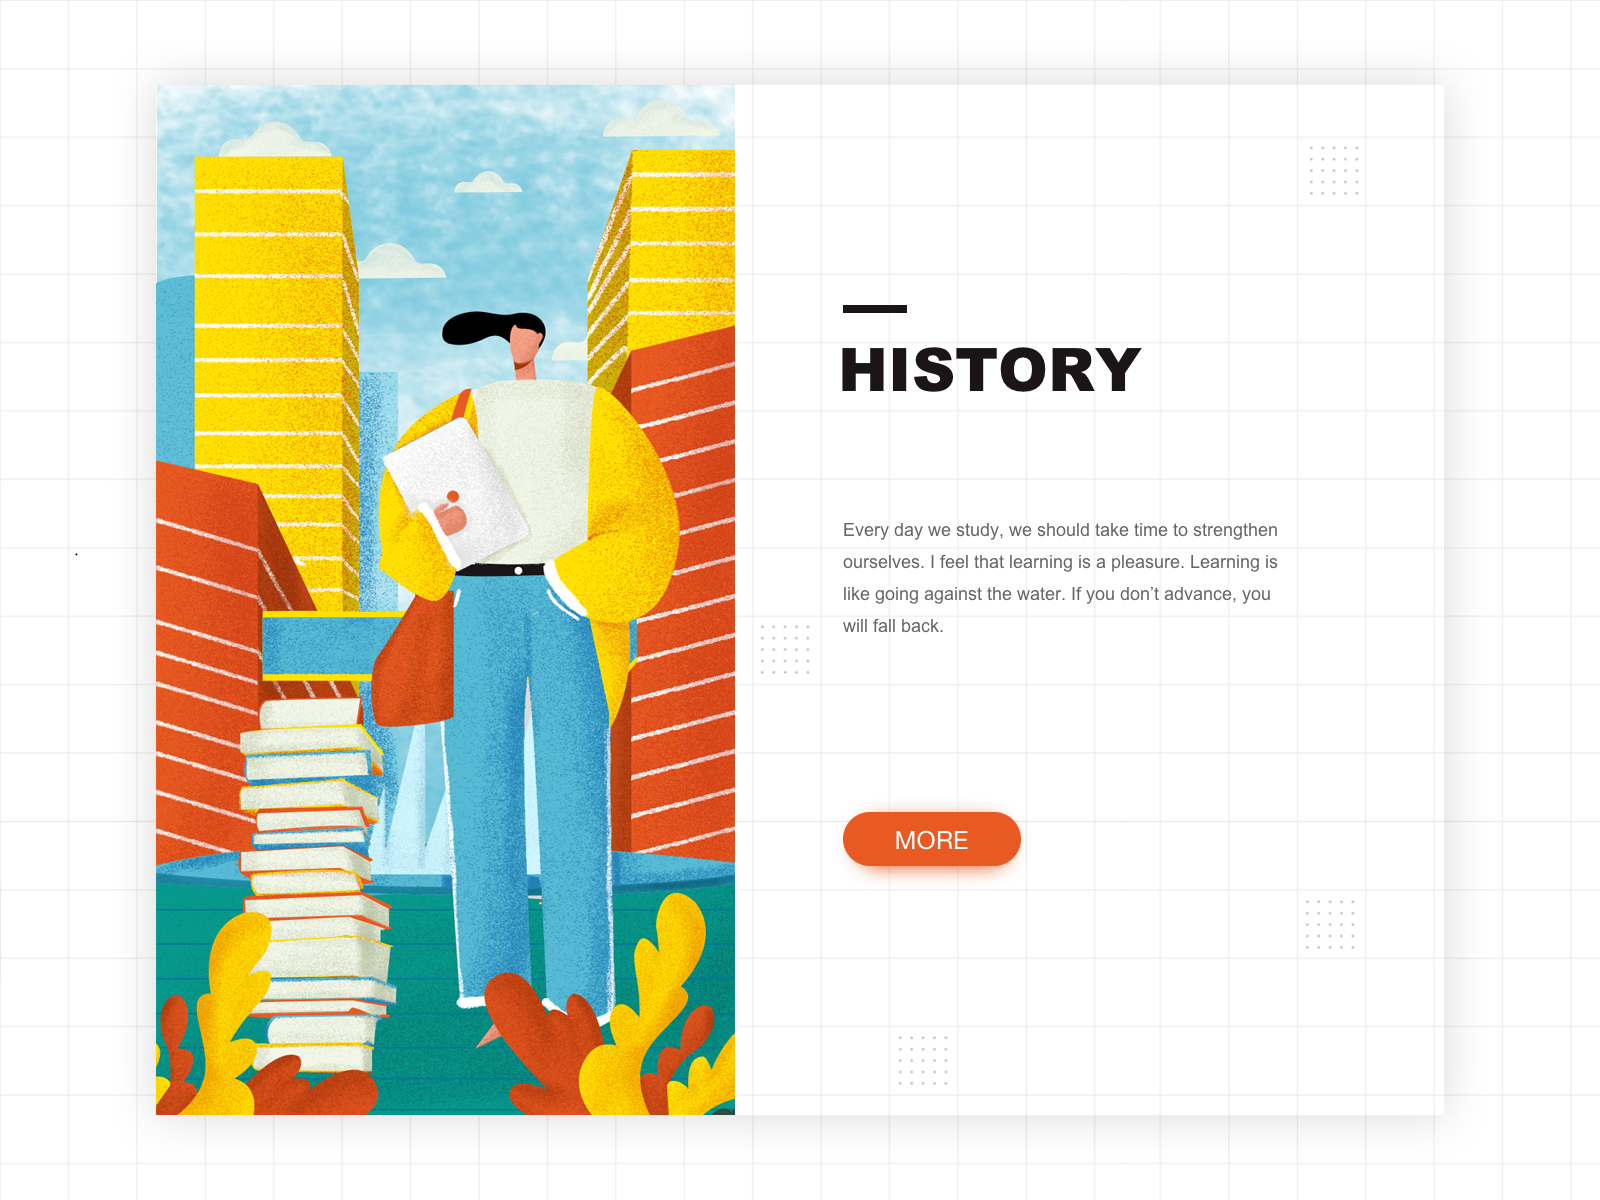 Learning illustration by March fly on Dribbble